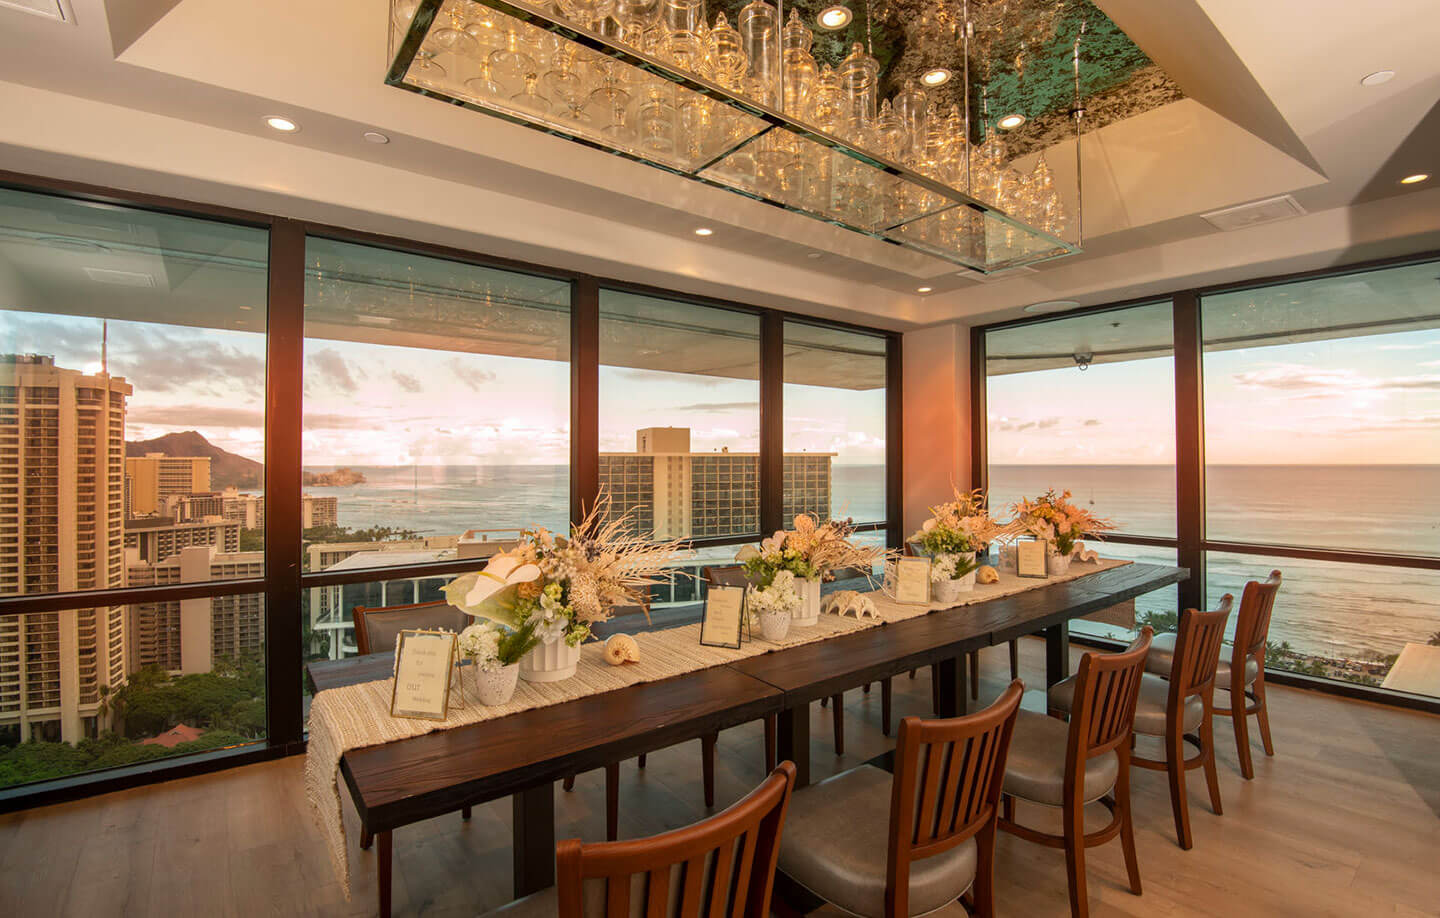 Formal dining set up and decor with Diamond Head and ocean views